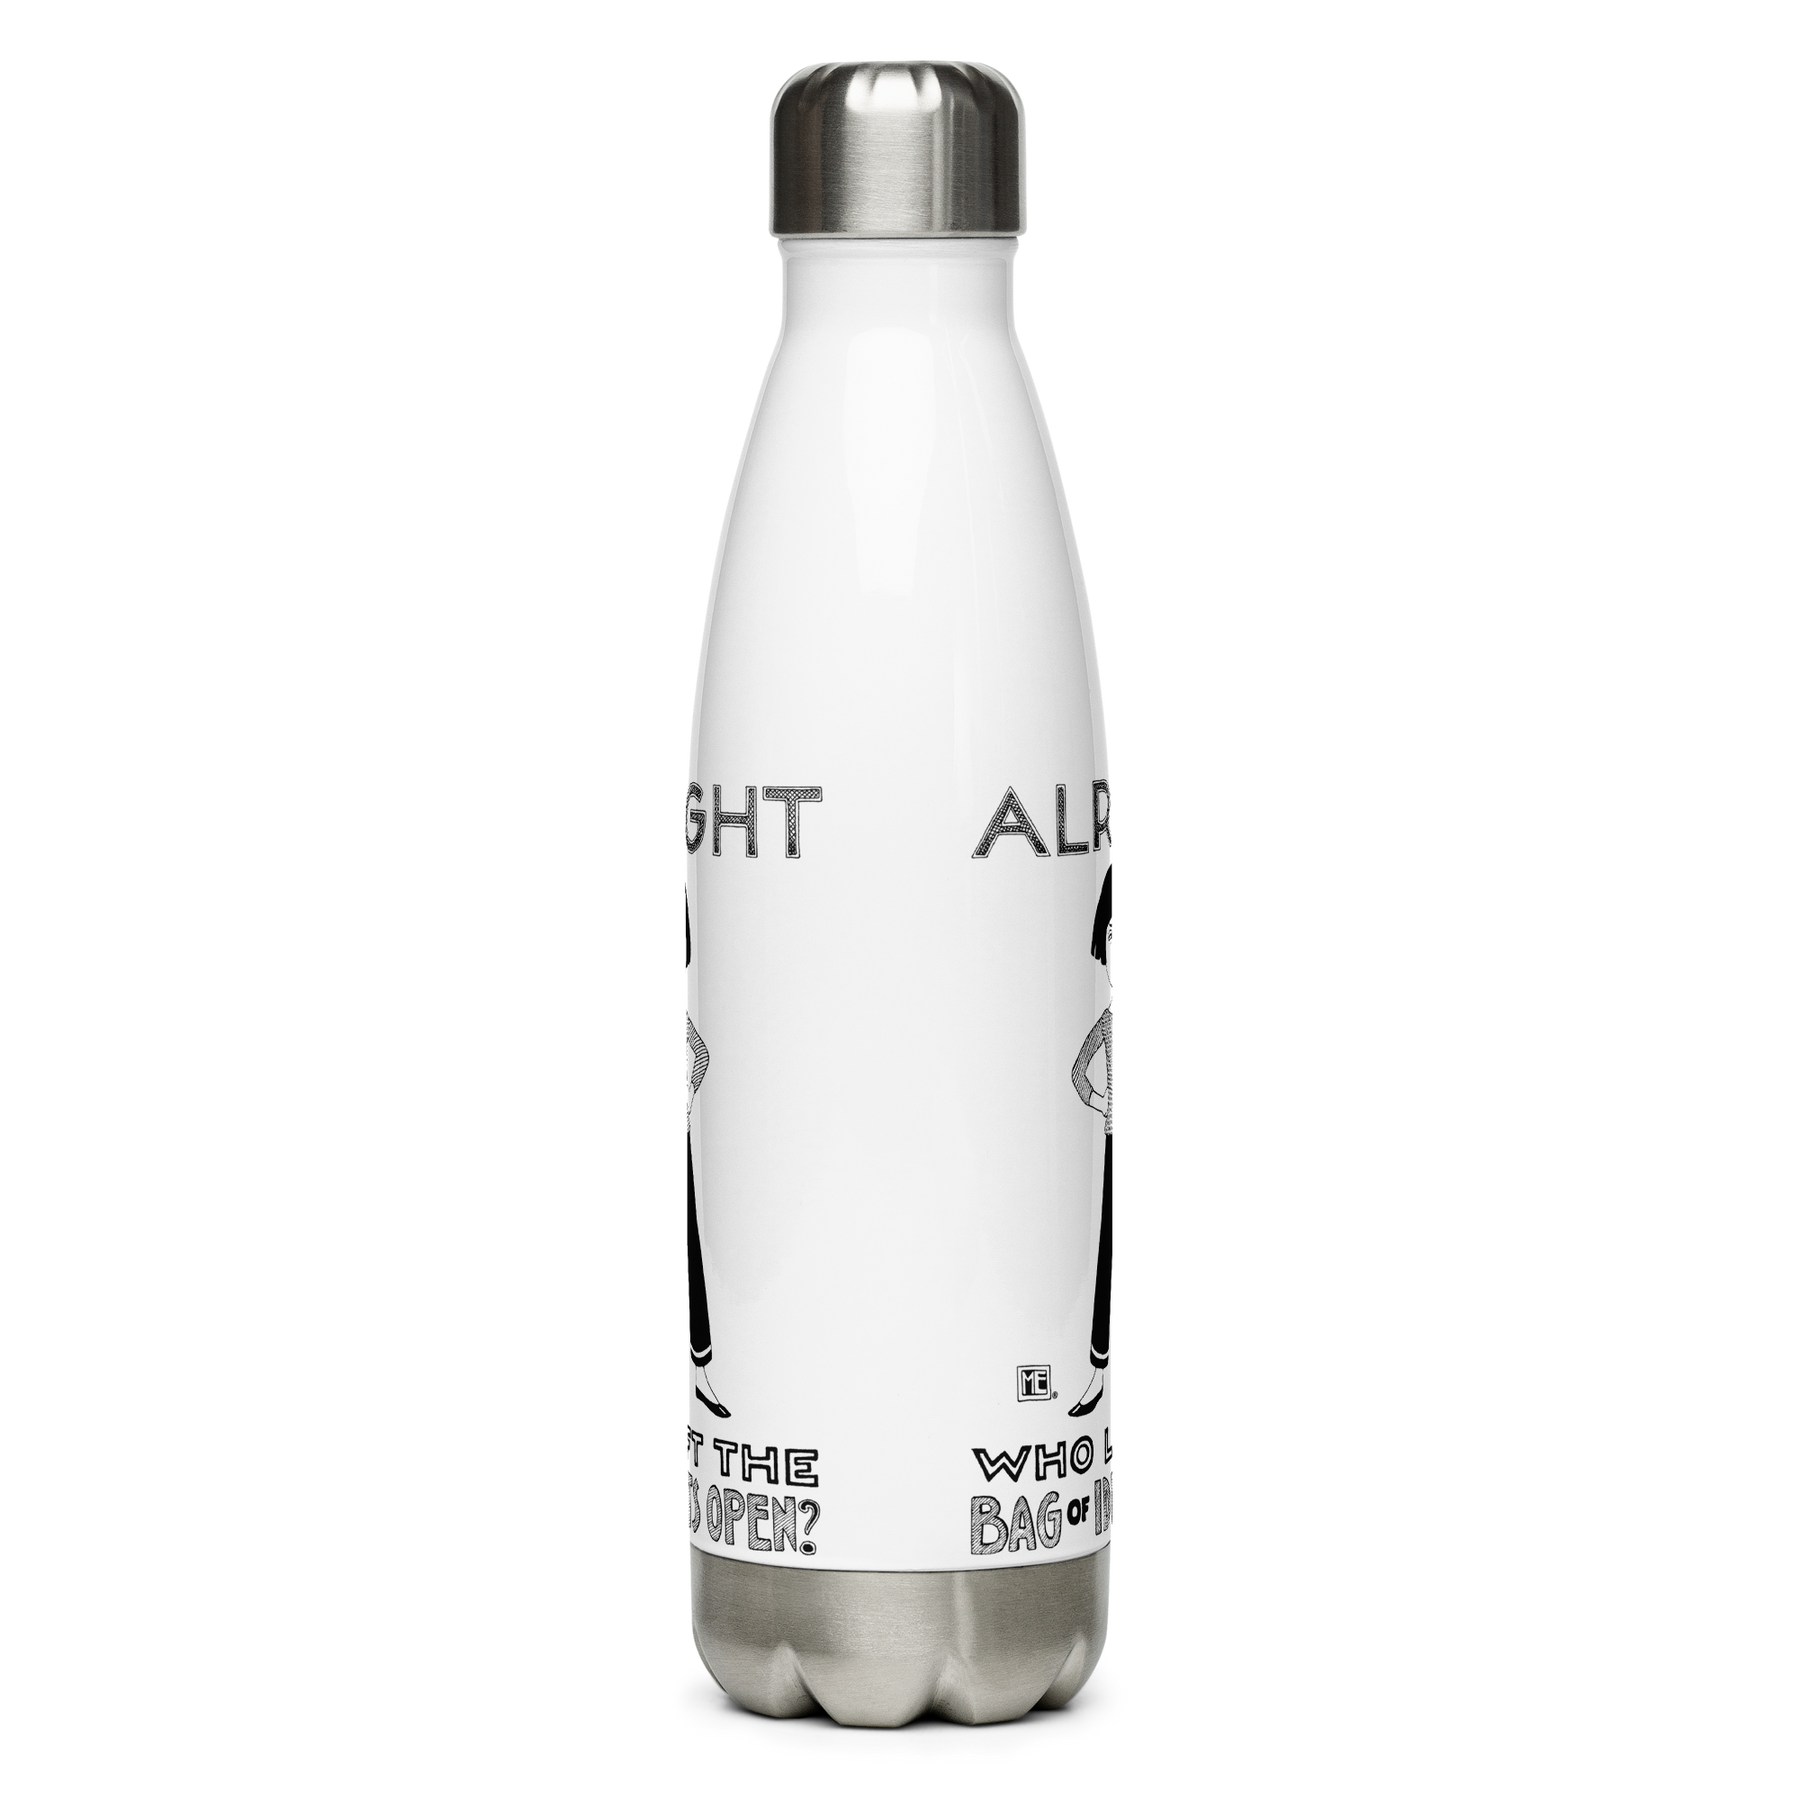 Bag of Idiots Stainless Steel Water Bottle